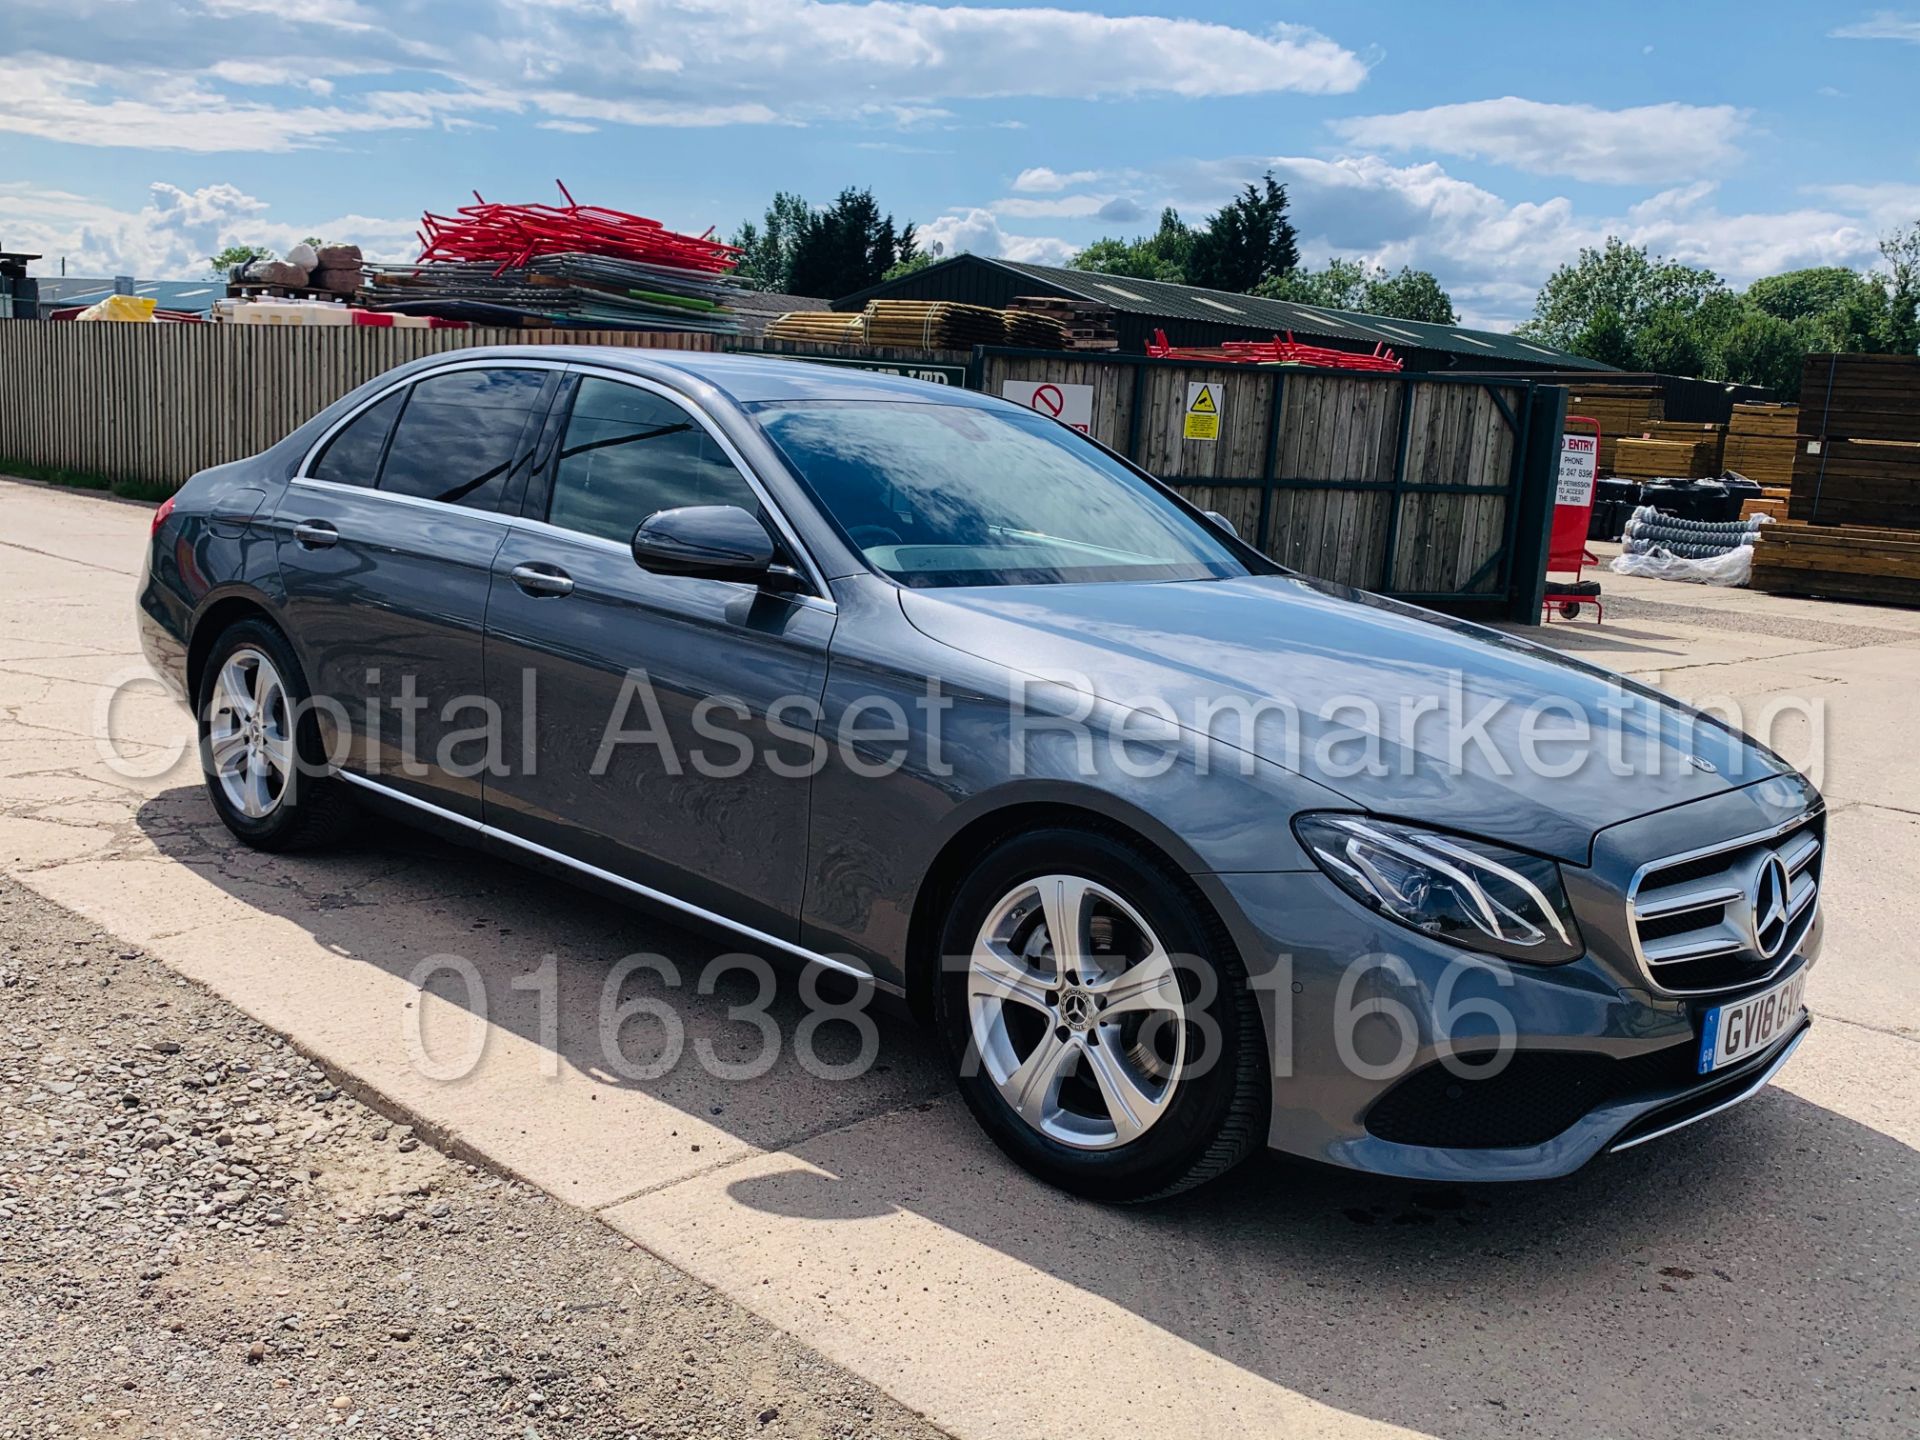 (On Sale) MERCEDES-BENZ E220D *SALOON* (2018 - NEW MODEL) '9-G TRONIC AUTO - LEATHER - SAT NAV' - Image 2 of 56